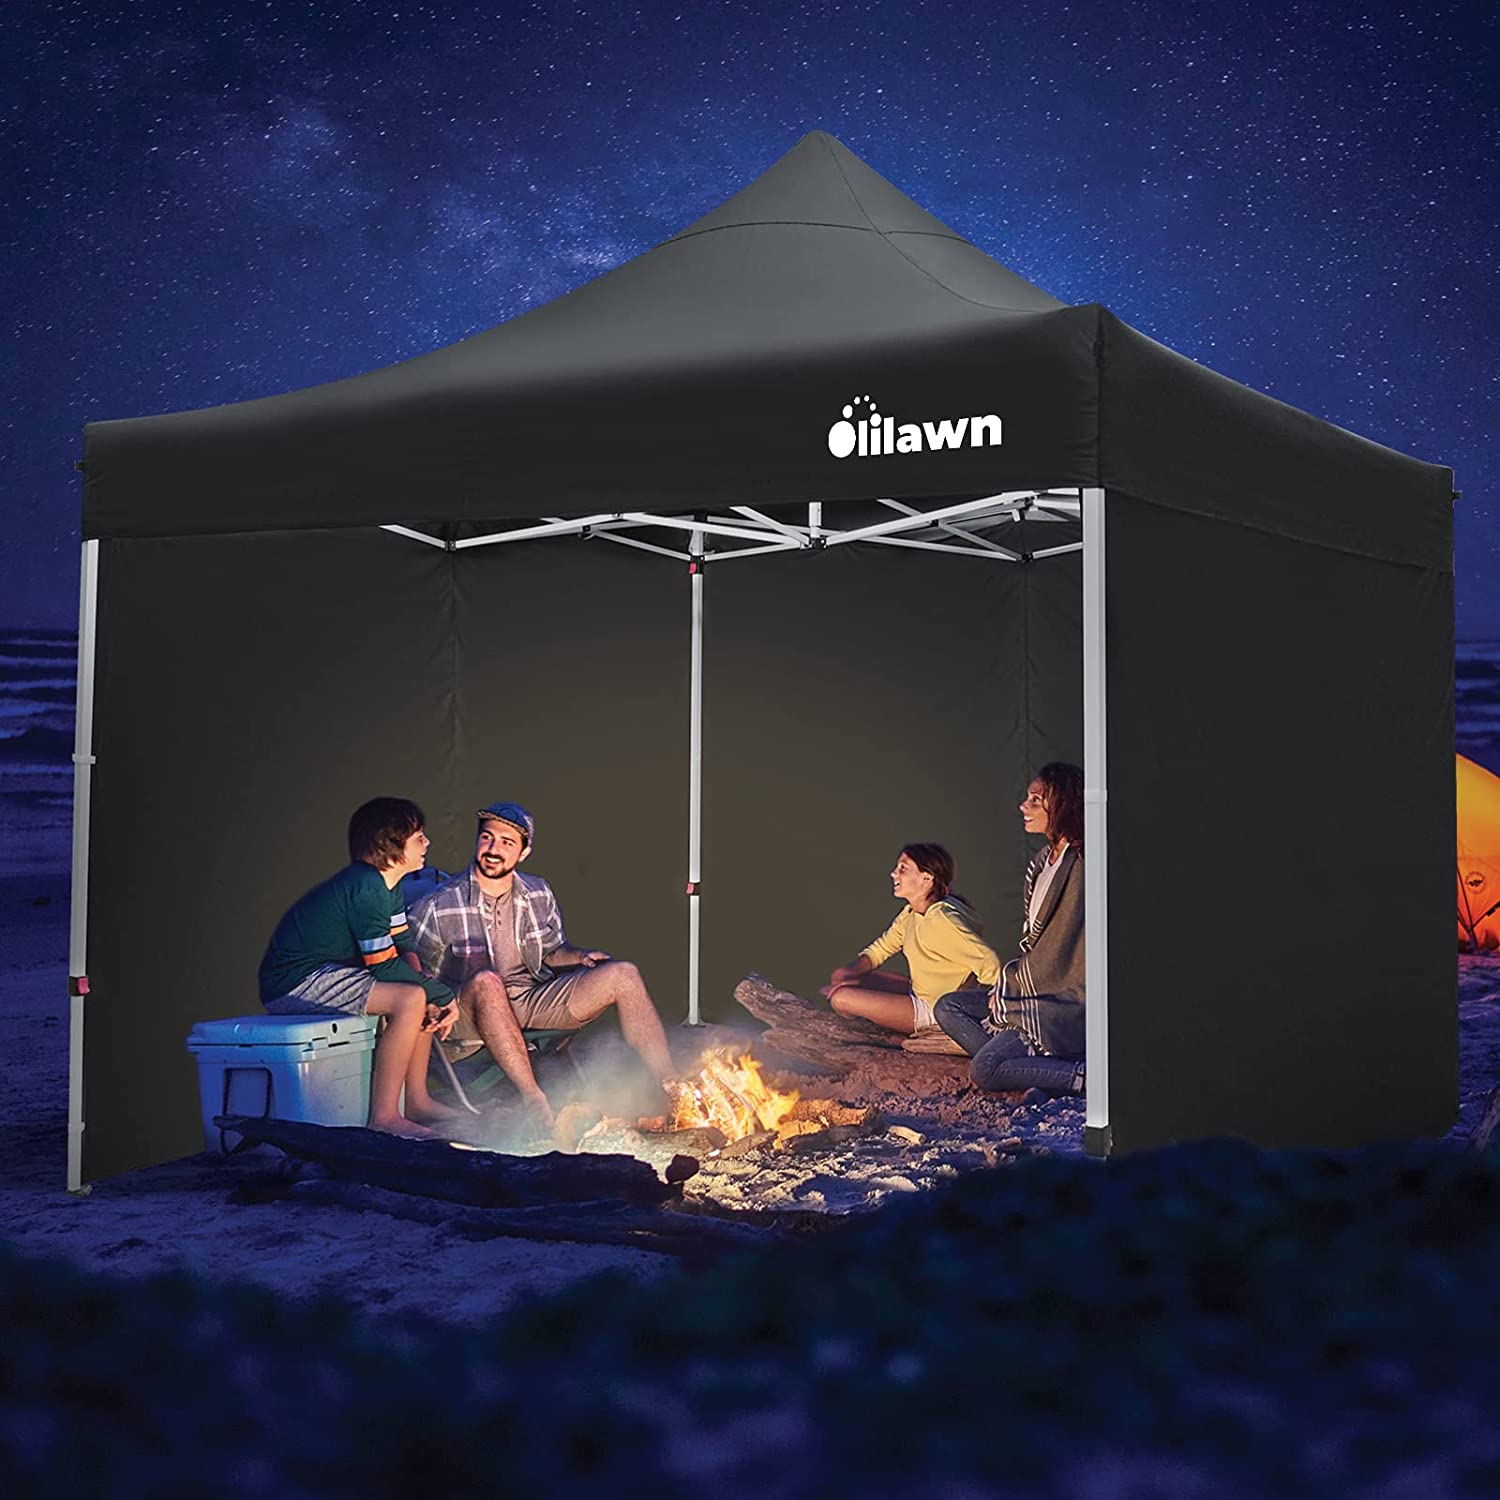 OLILAWN 10x10 Pop Up Canopy Tent Outdoor Shade Canopy